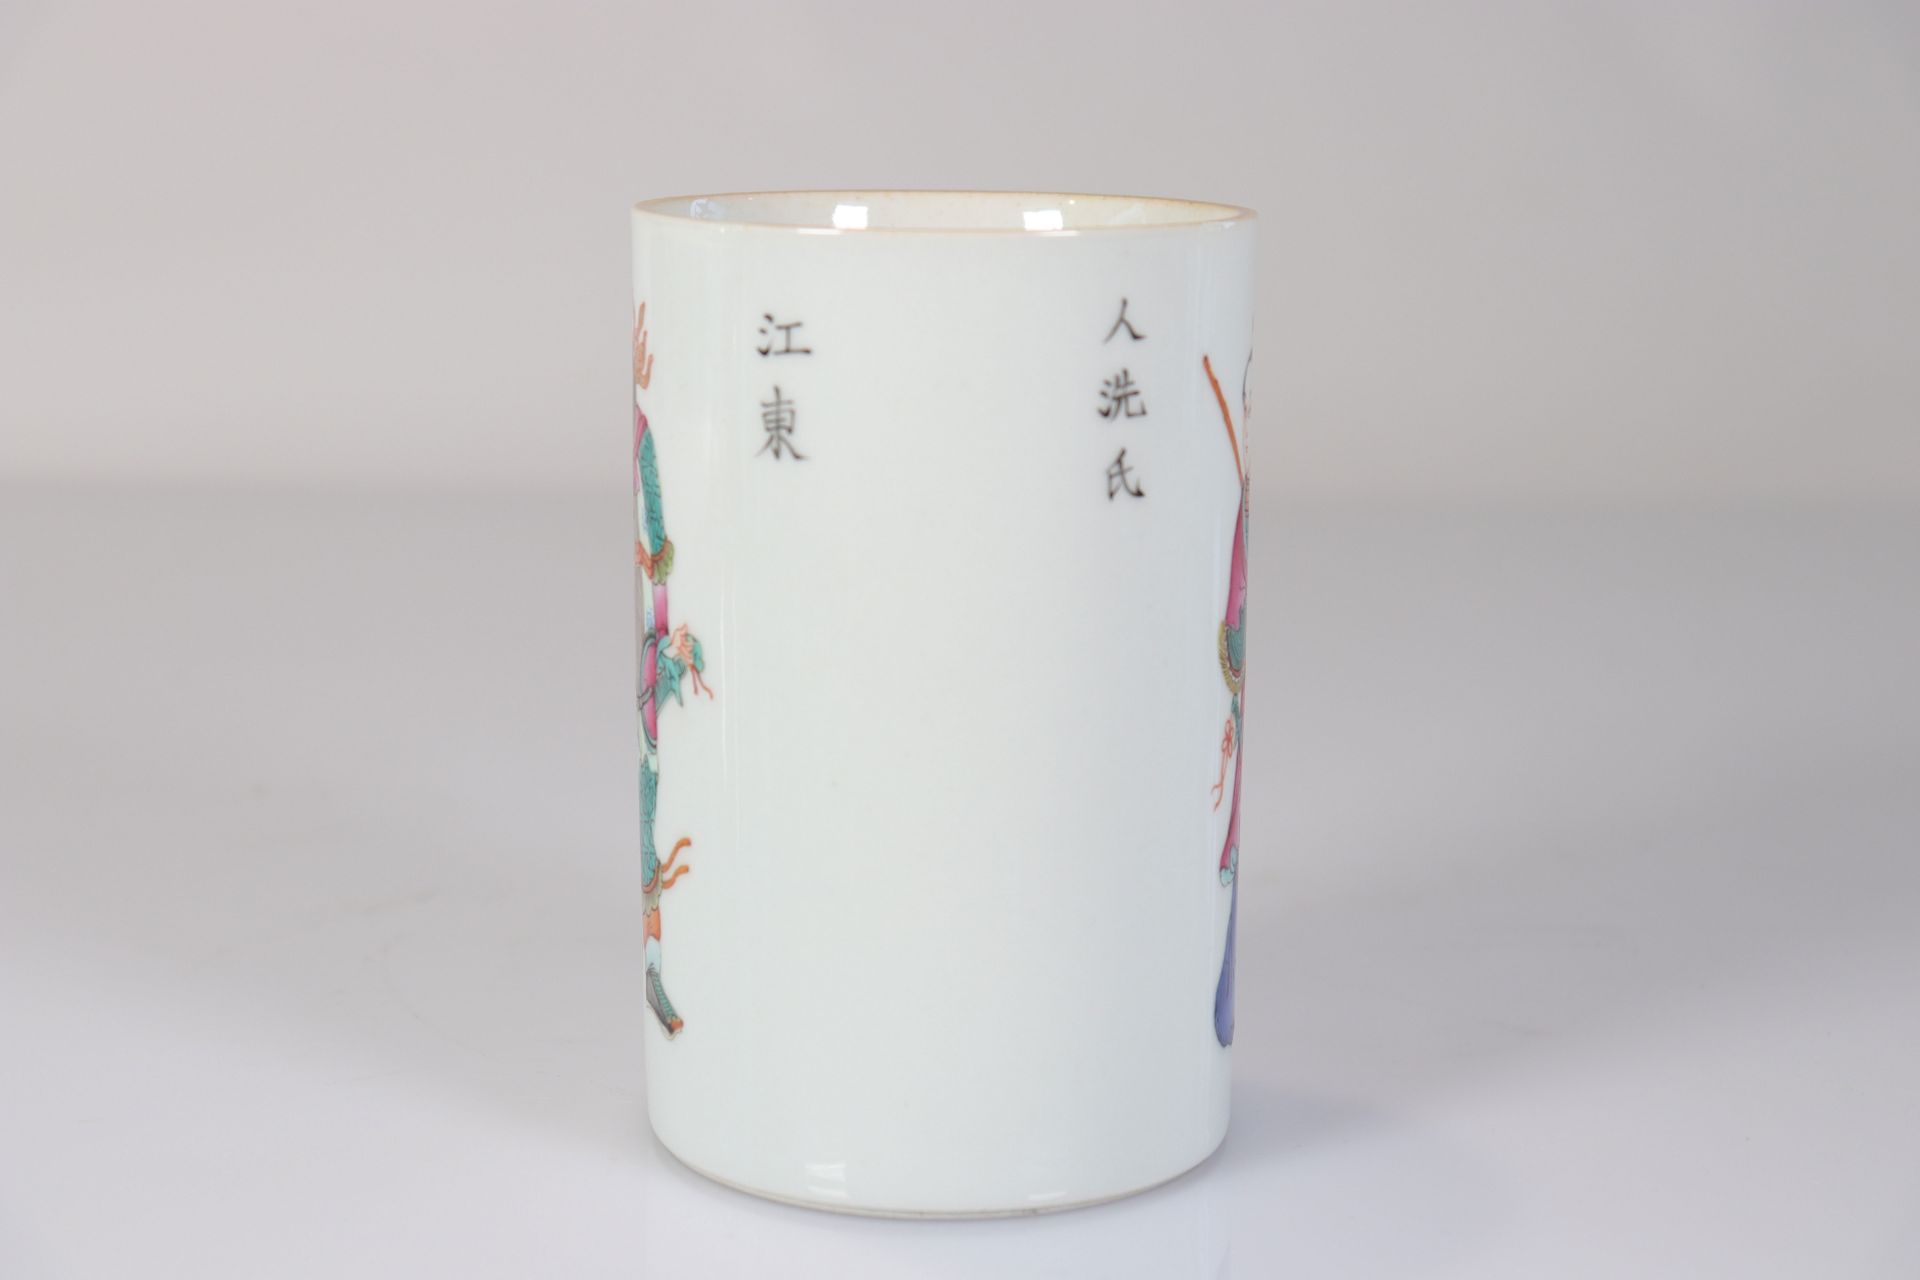 China brush holder decorated with characters - Image 3 of 4